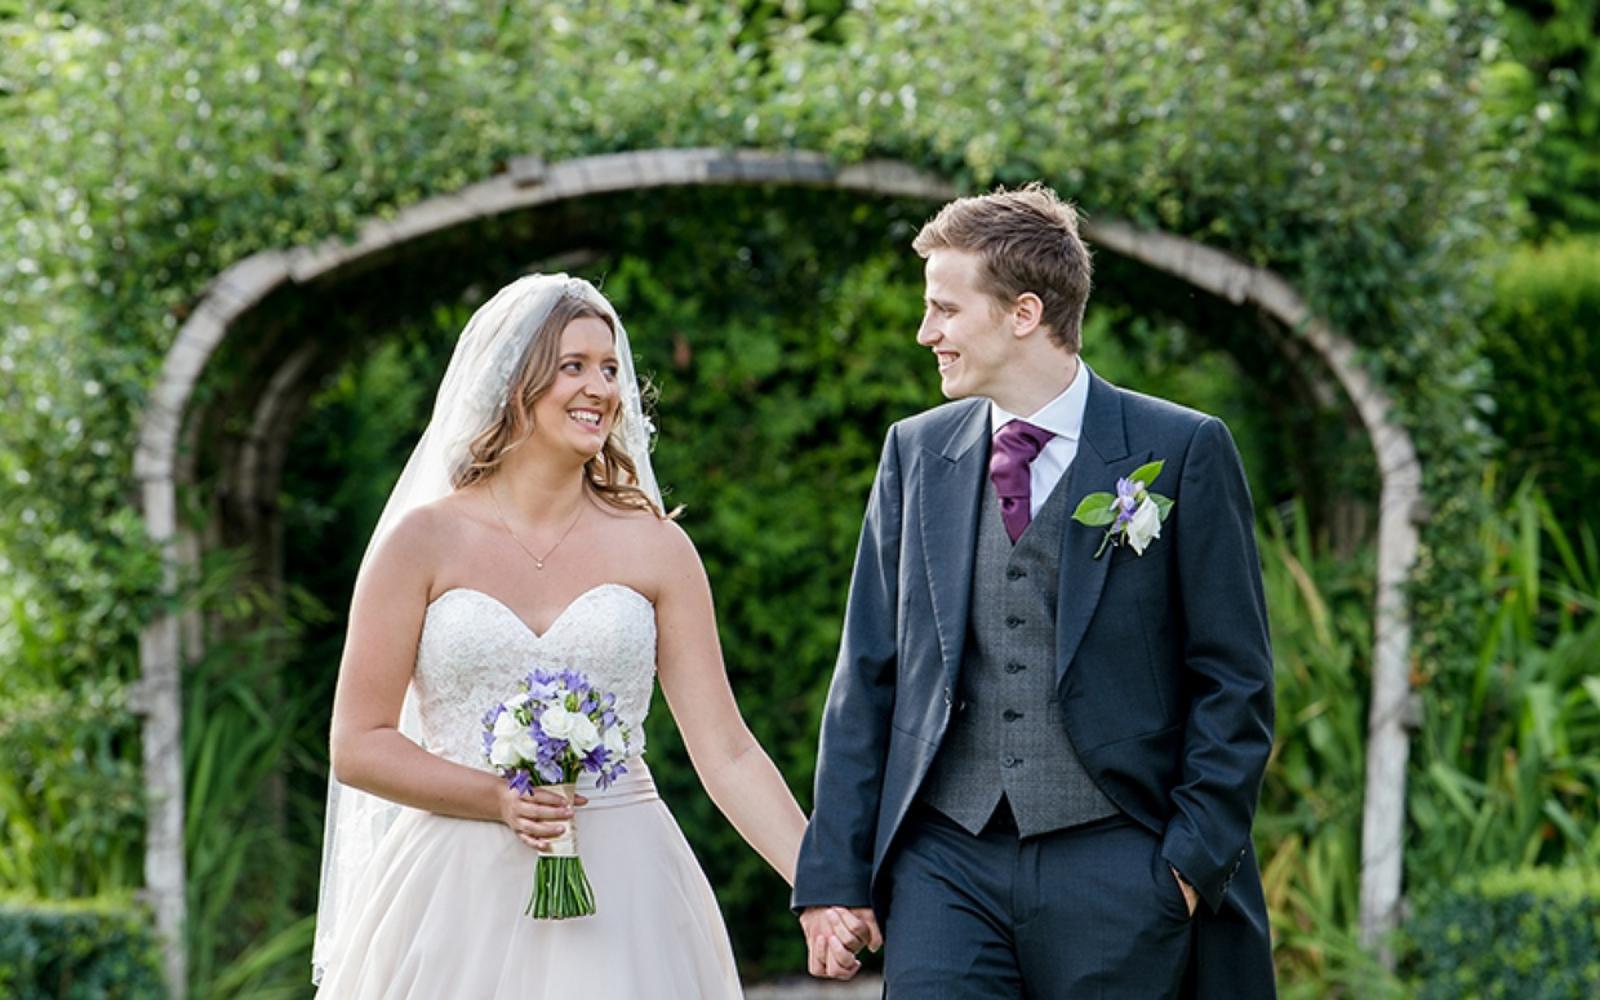 Real Wedding from Whitewed Directory approved wedding photographer duo of Cirencester Capture Every Moment intimate wedding at Whatley Manor Wiltshire bride and groom